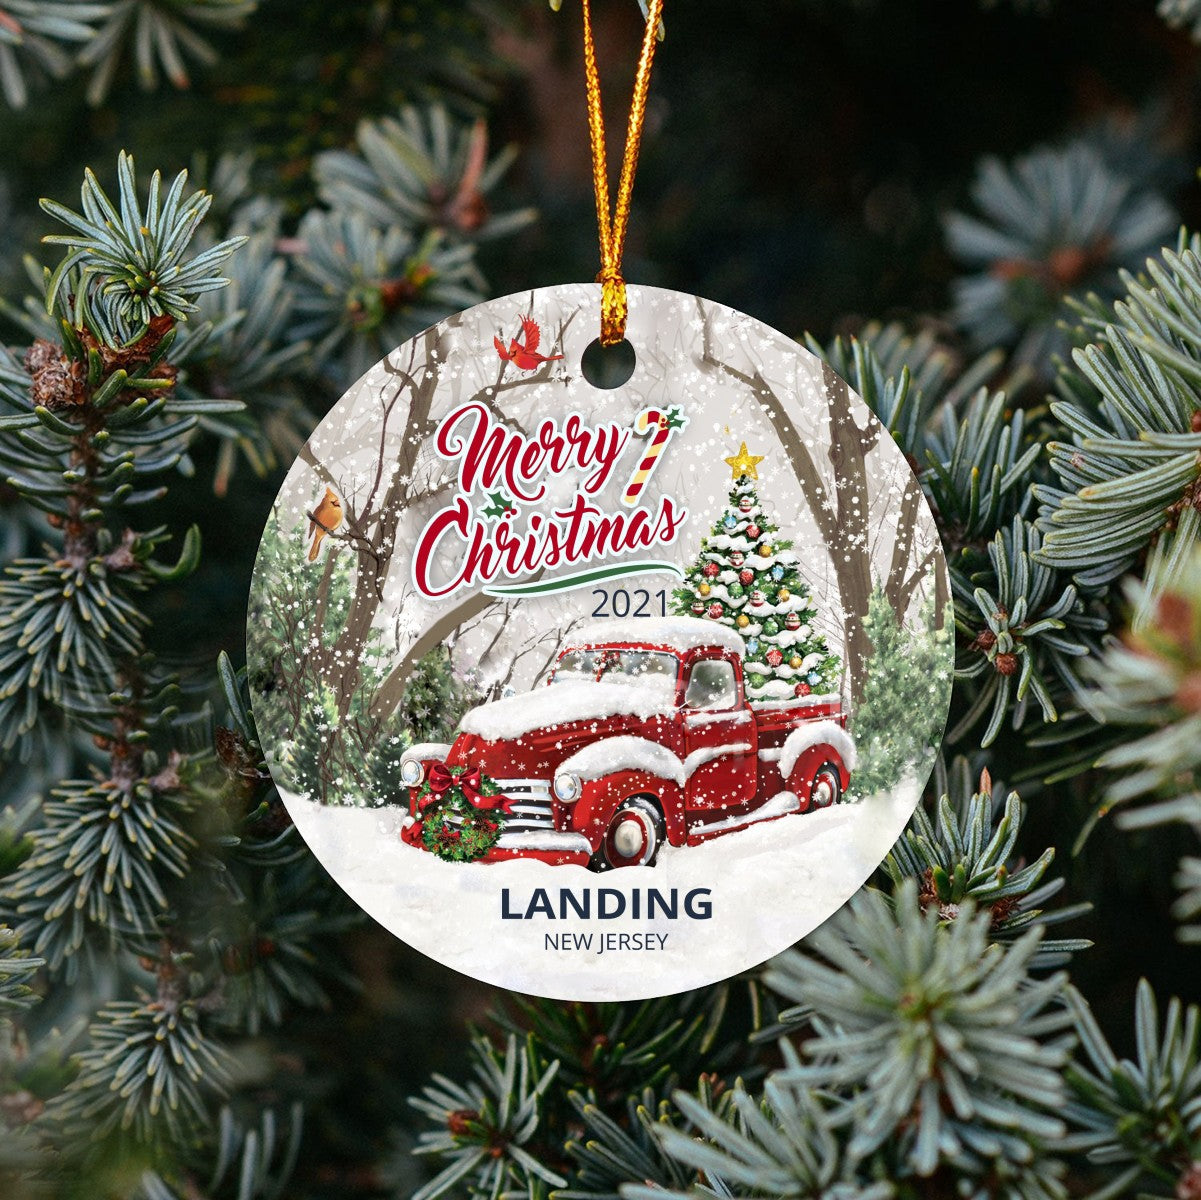 Christmas Tree Ornaments Landing - Ornament With Name City, State Landing New Jersey NJ Ornament - Red Truck Xmas Ornaments 3'' Plastic Gift For Family, Friend And Housewarming